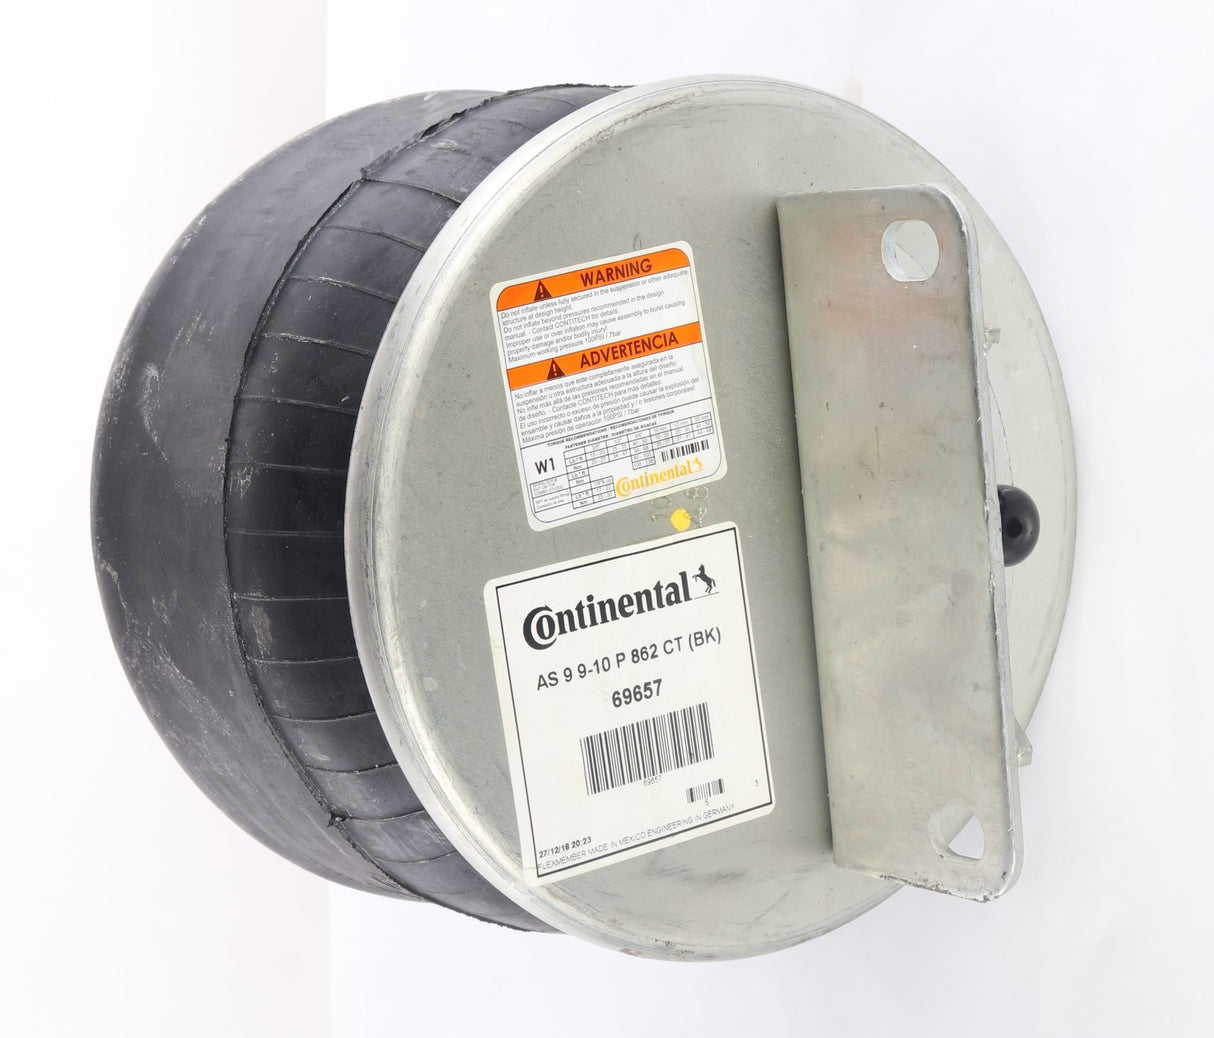 CONTINENTAL AG - CONTITECH/ELITE/GOODYEAR/ROULUNDS ­-­ 69657 ­-­ AIR SPRING 9 9-10 P 862